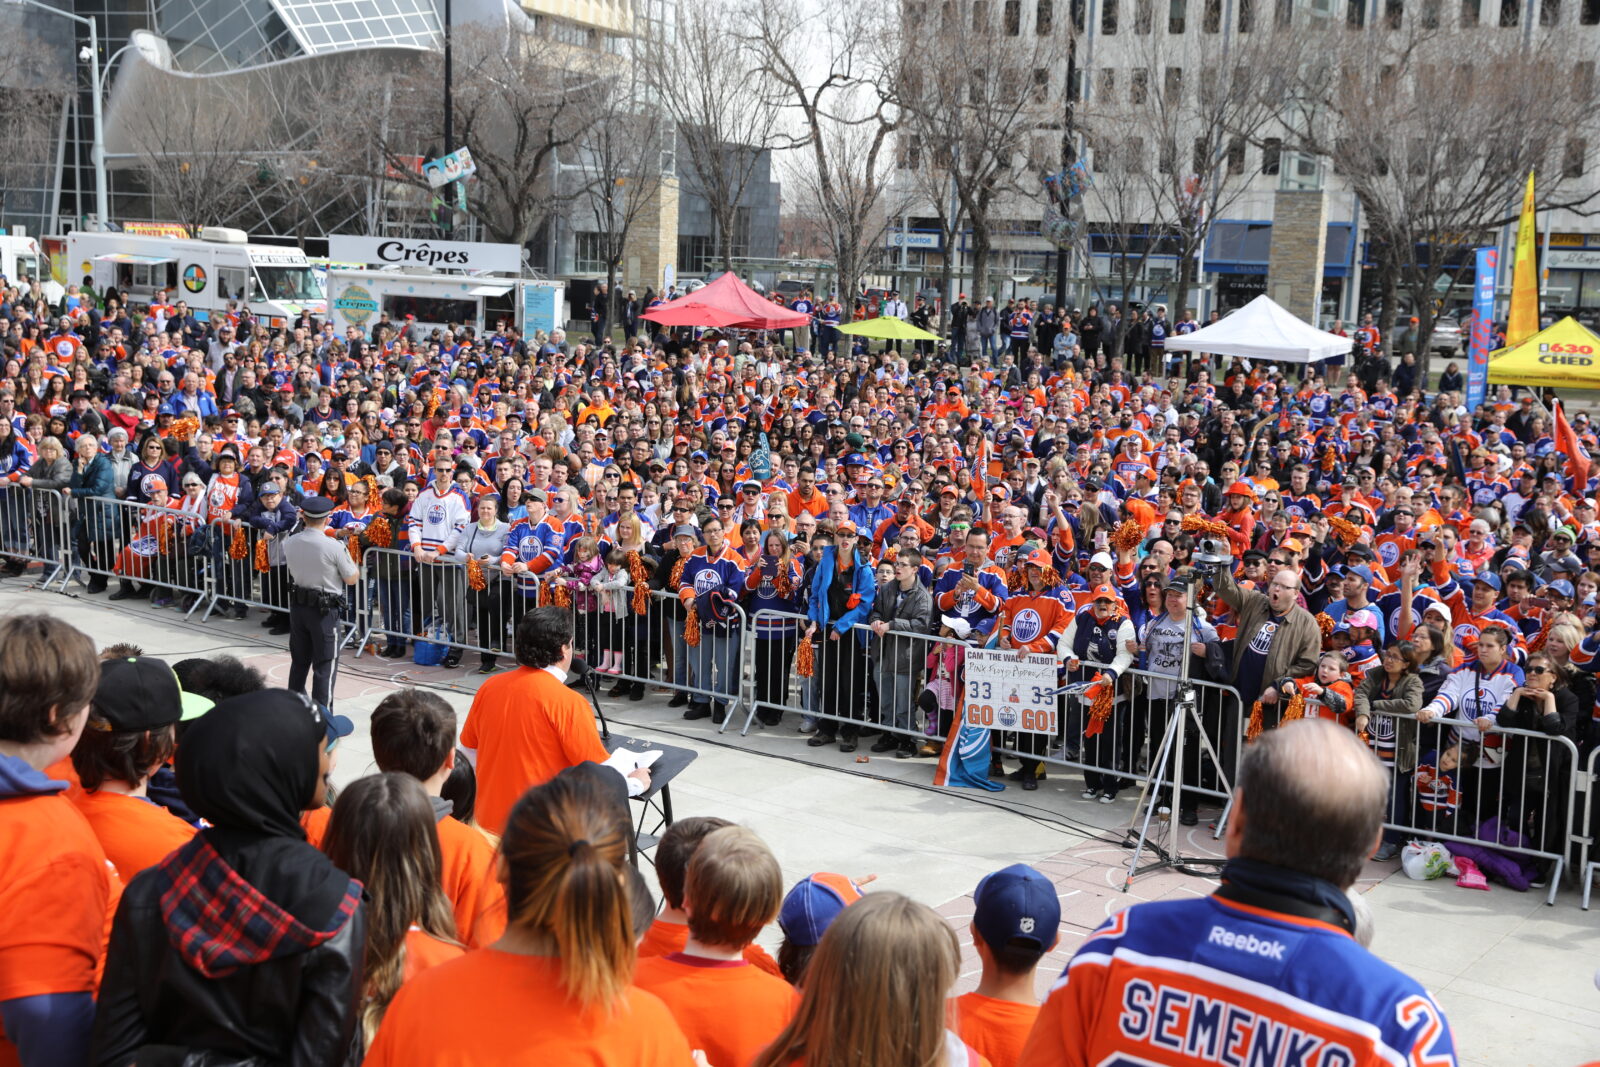 Edmonton Oilers Churchill Square Watch Party May 24